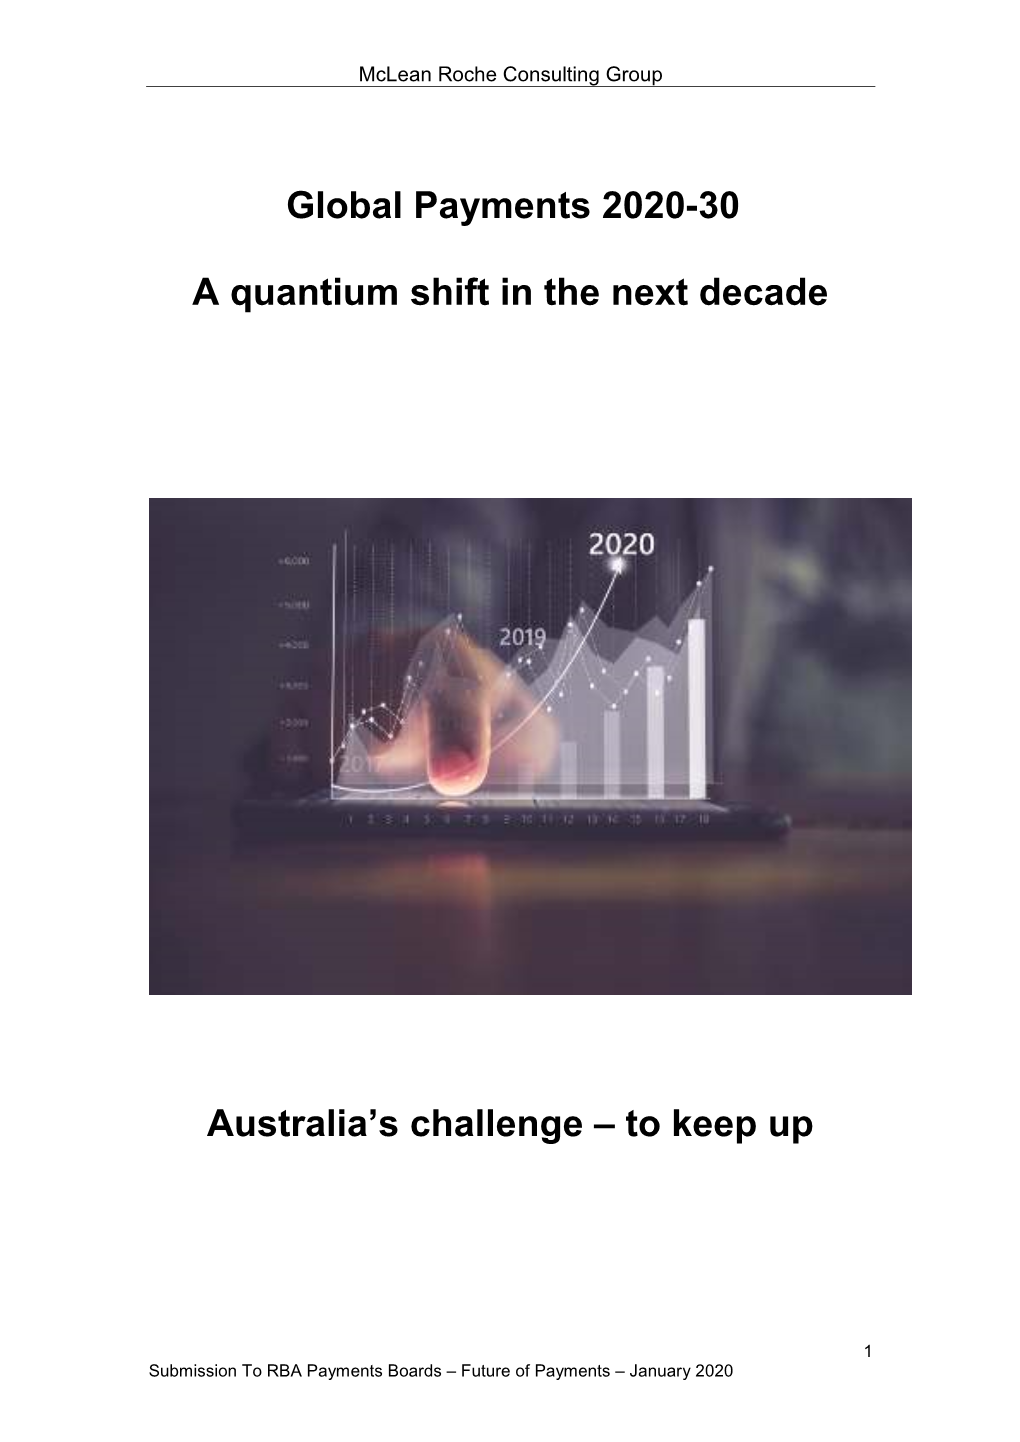 Global Payments 2020-30 a Quantium Shift in the Next Decade Australia's Challenge